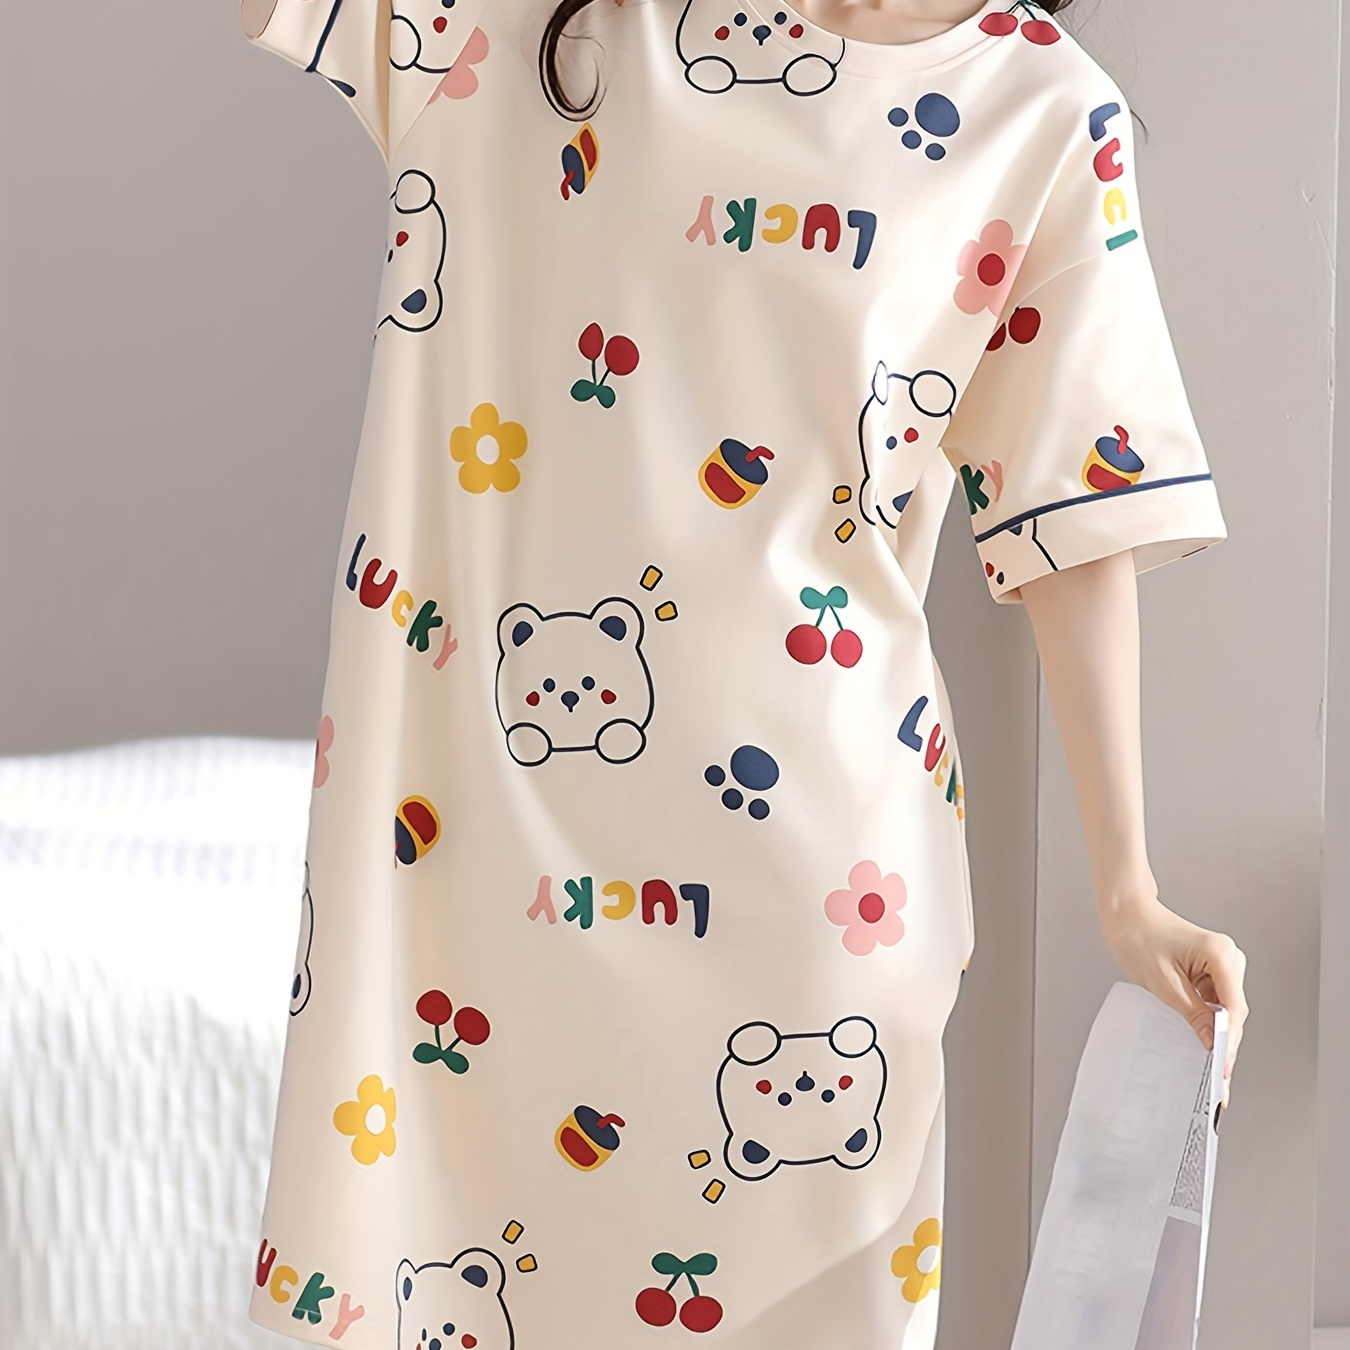 

Women's Allover Cartoon Print Cute Lounge Dress, Short Sleeve Round Neck Loose Fit Tee Dress, Comfortable Nightgown